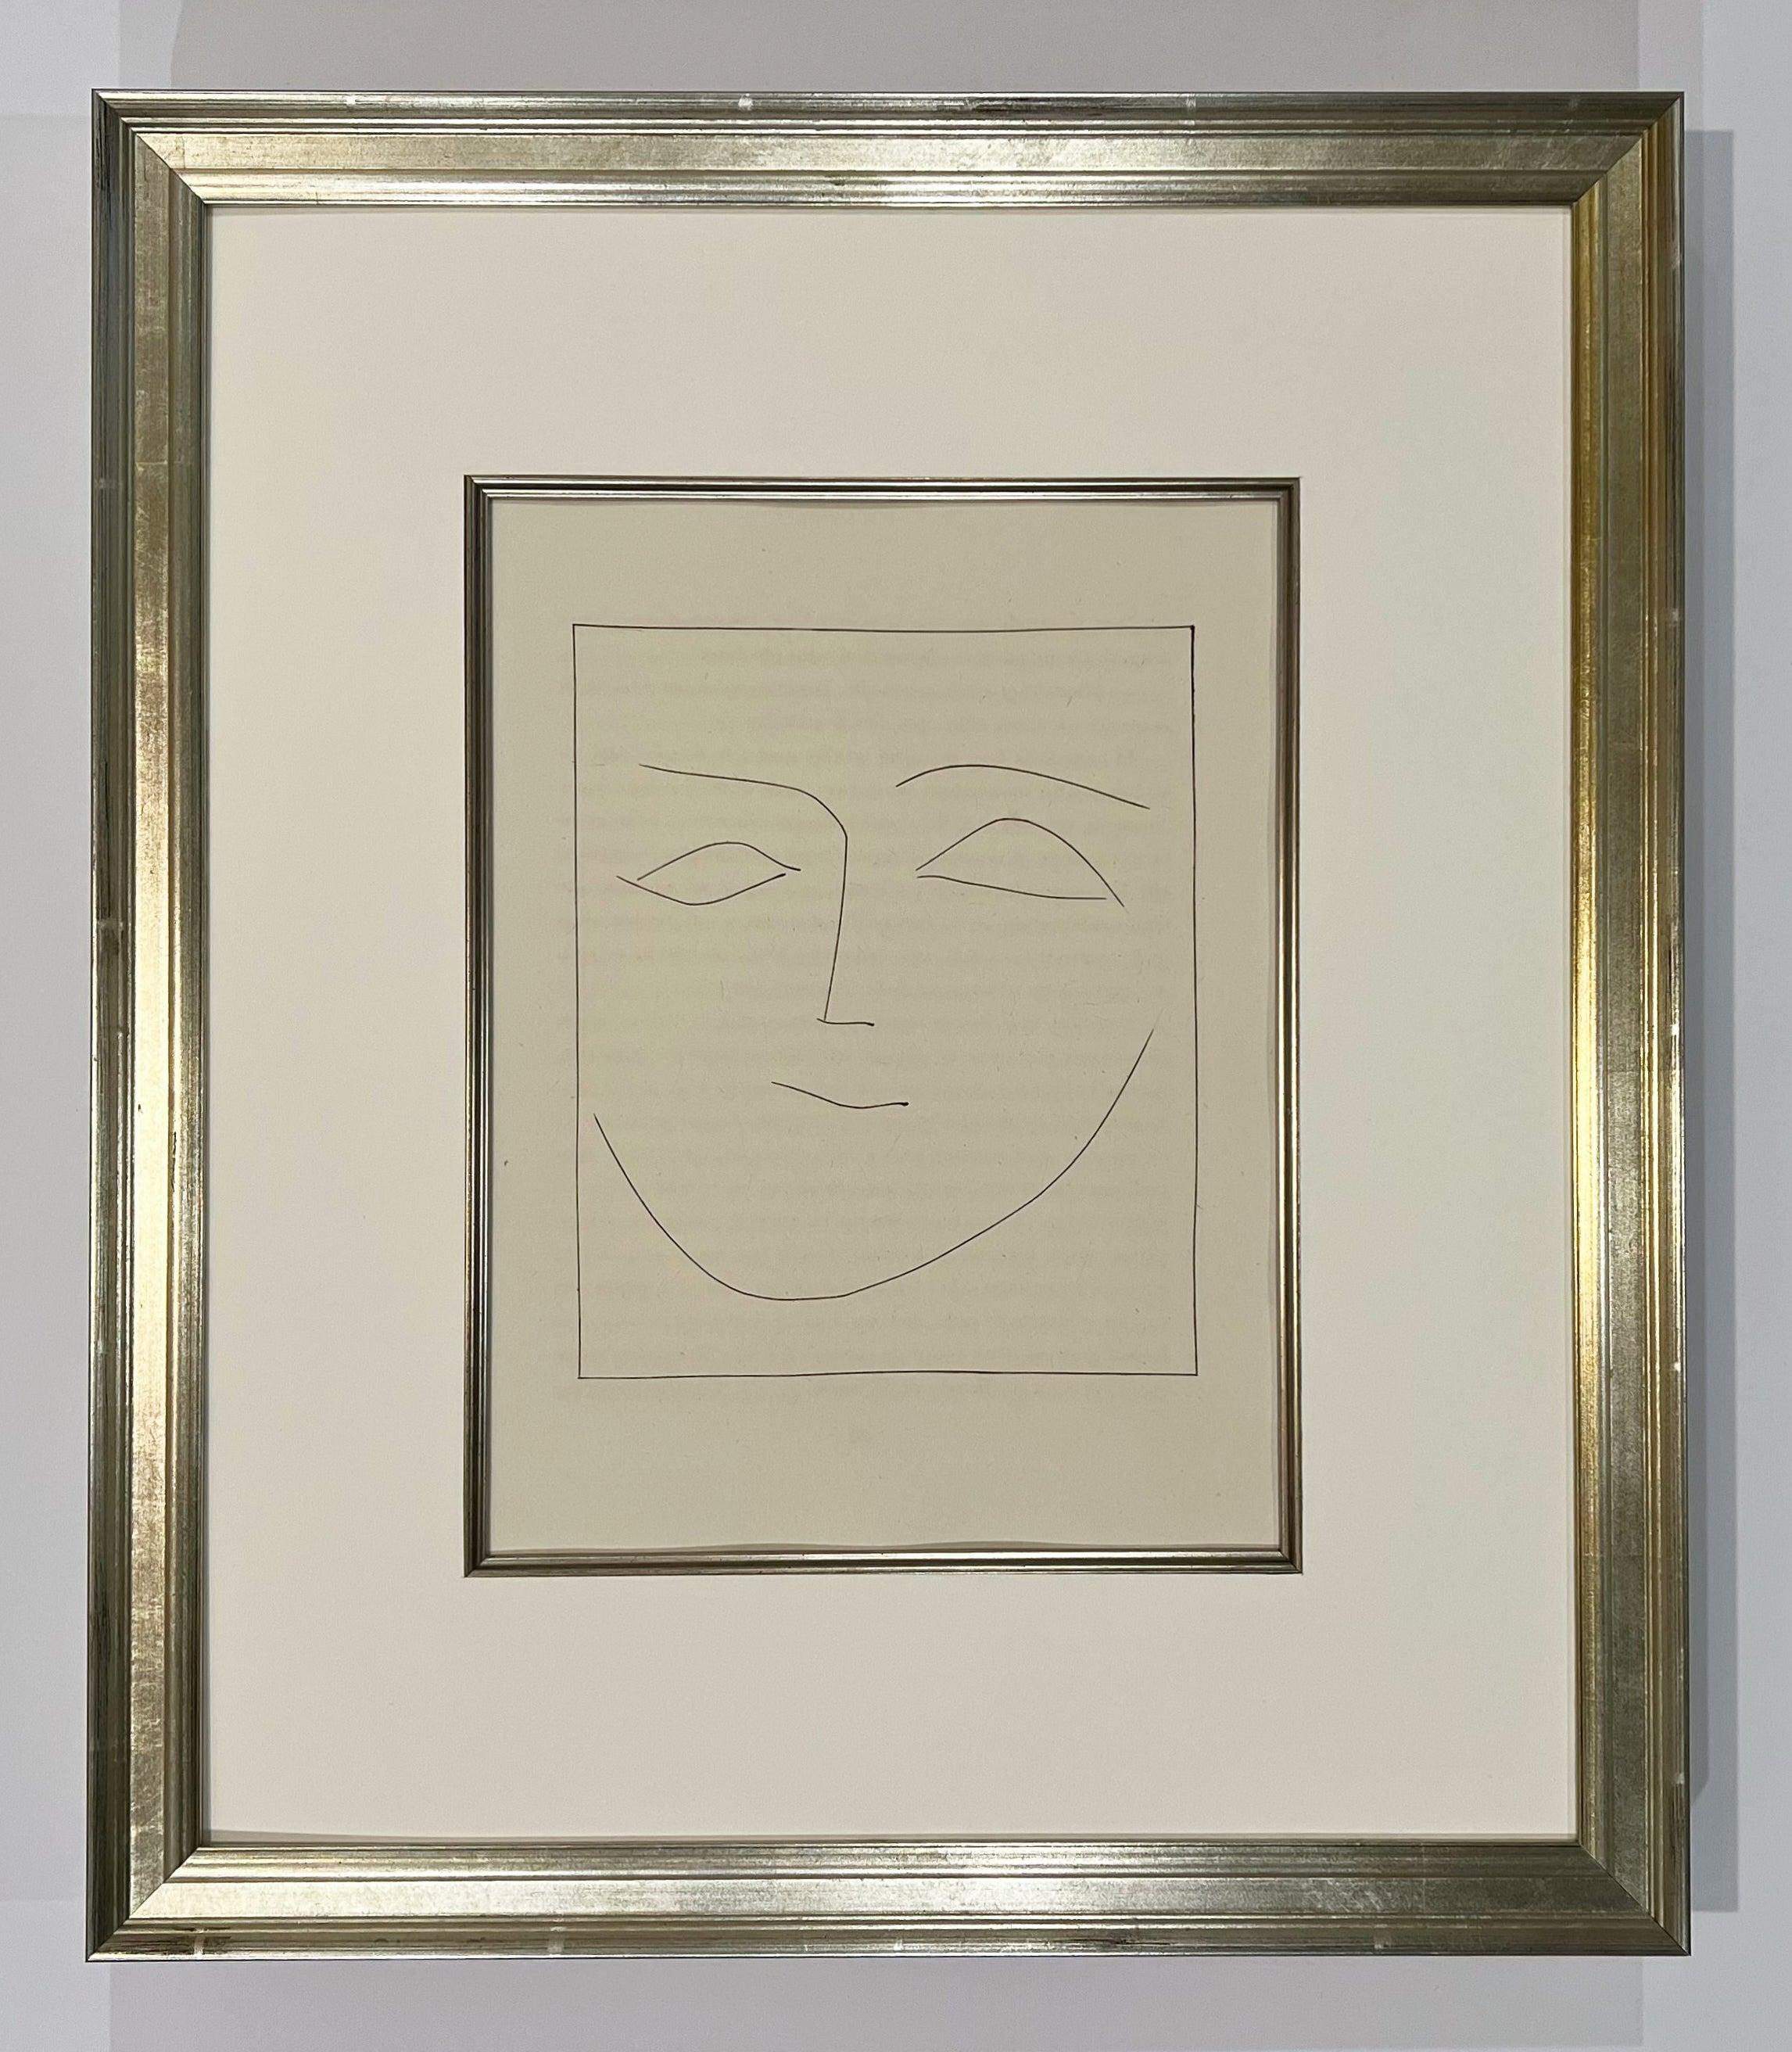 Square Head of a Woman Half Smiling (Plate XII), from Carmen - Print by Pablo Picasso